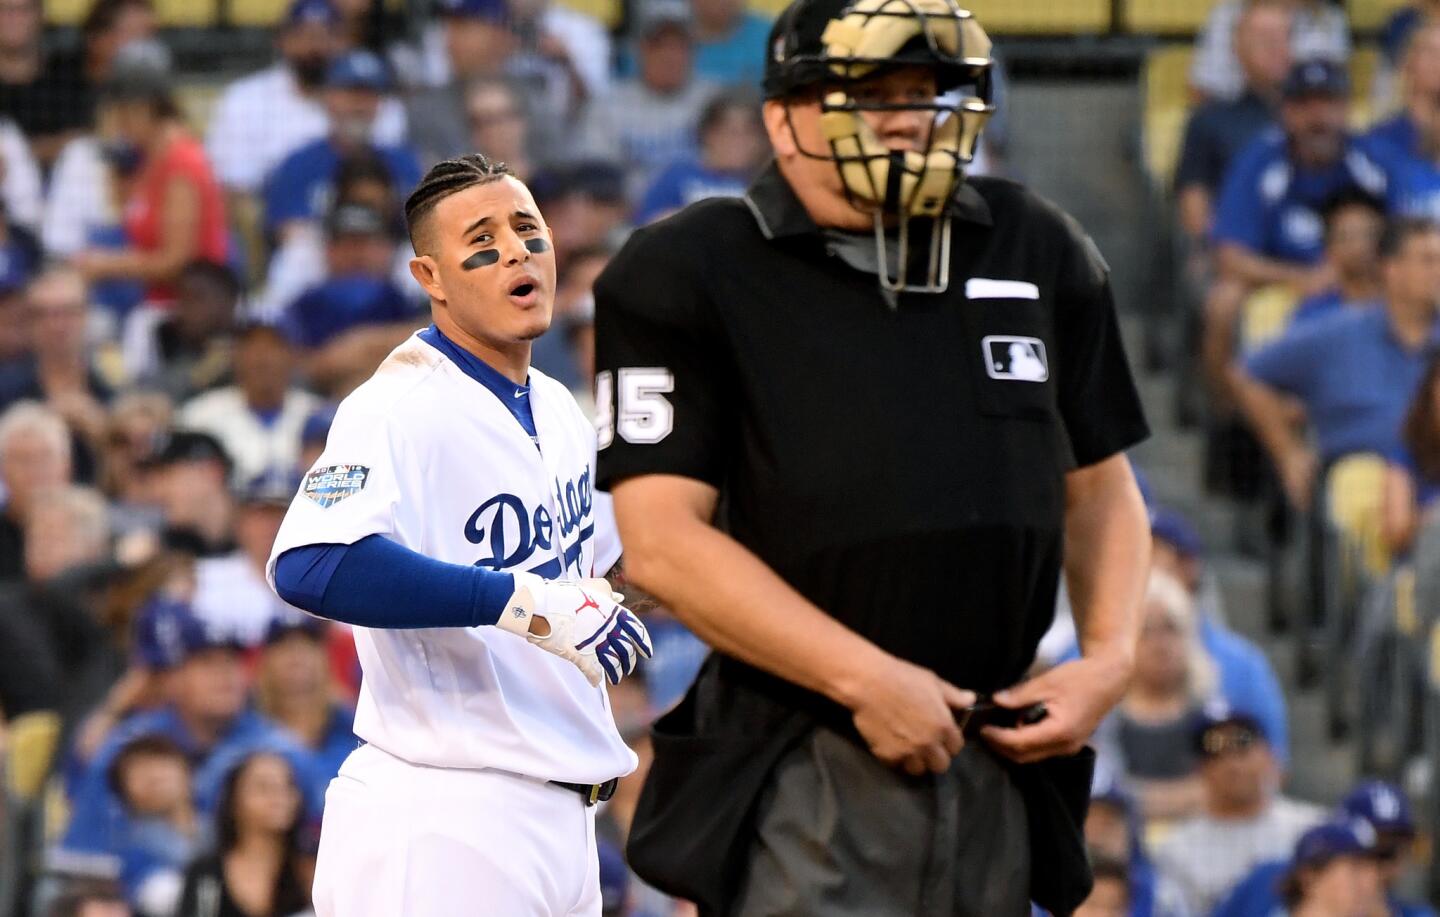 Ddogers Manny Machado complains to home plate umpire Jeff Nelson afgter striking out against the Red Sox in the 1st inning.